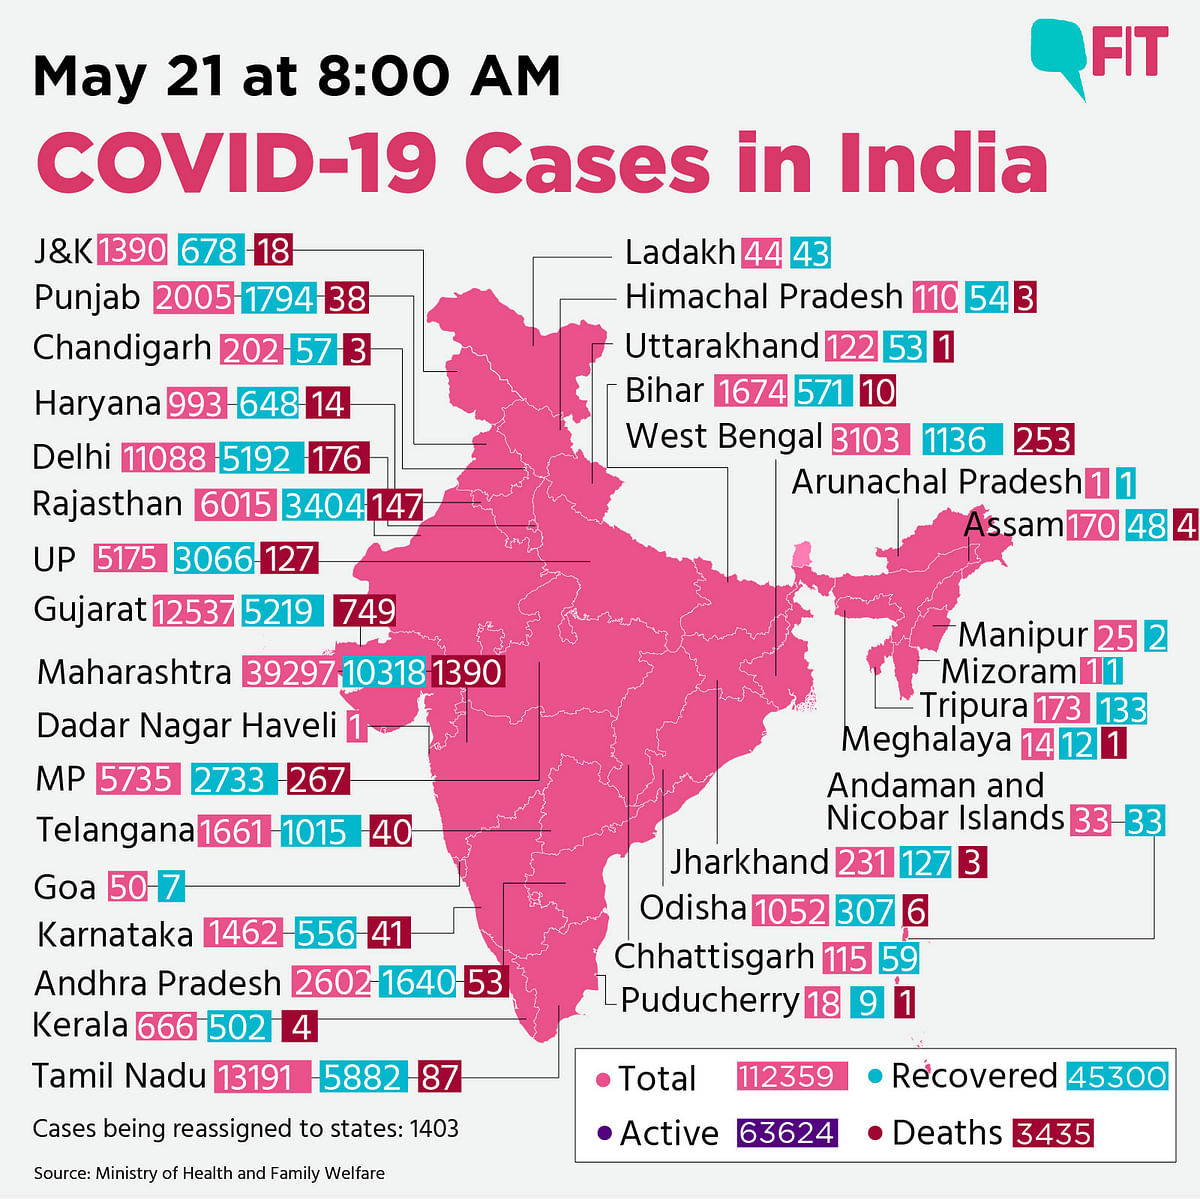 COVID-19 India: Total Cases Reach 1,12,359, Death Toll at 3,435